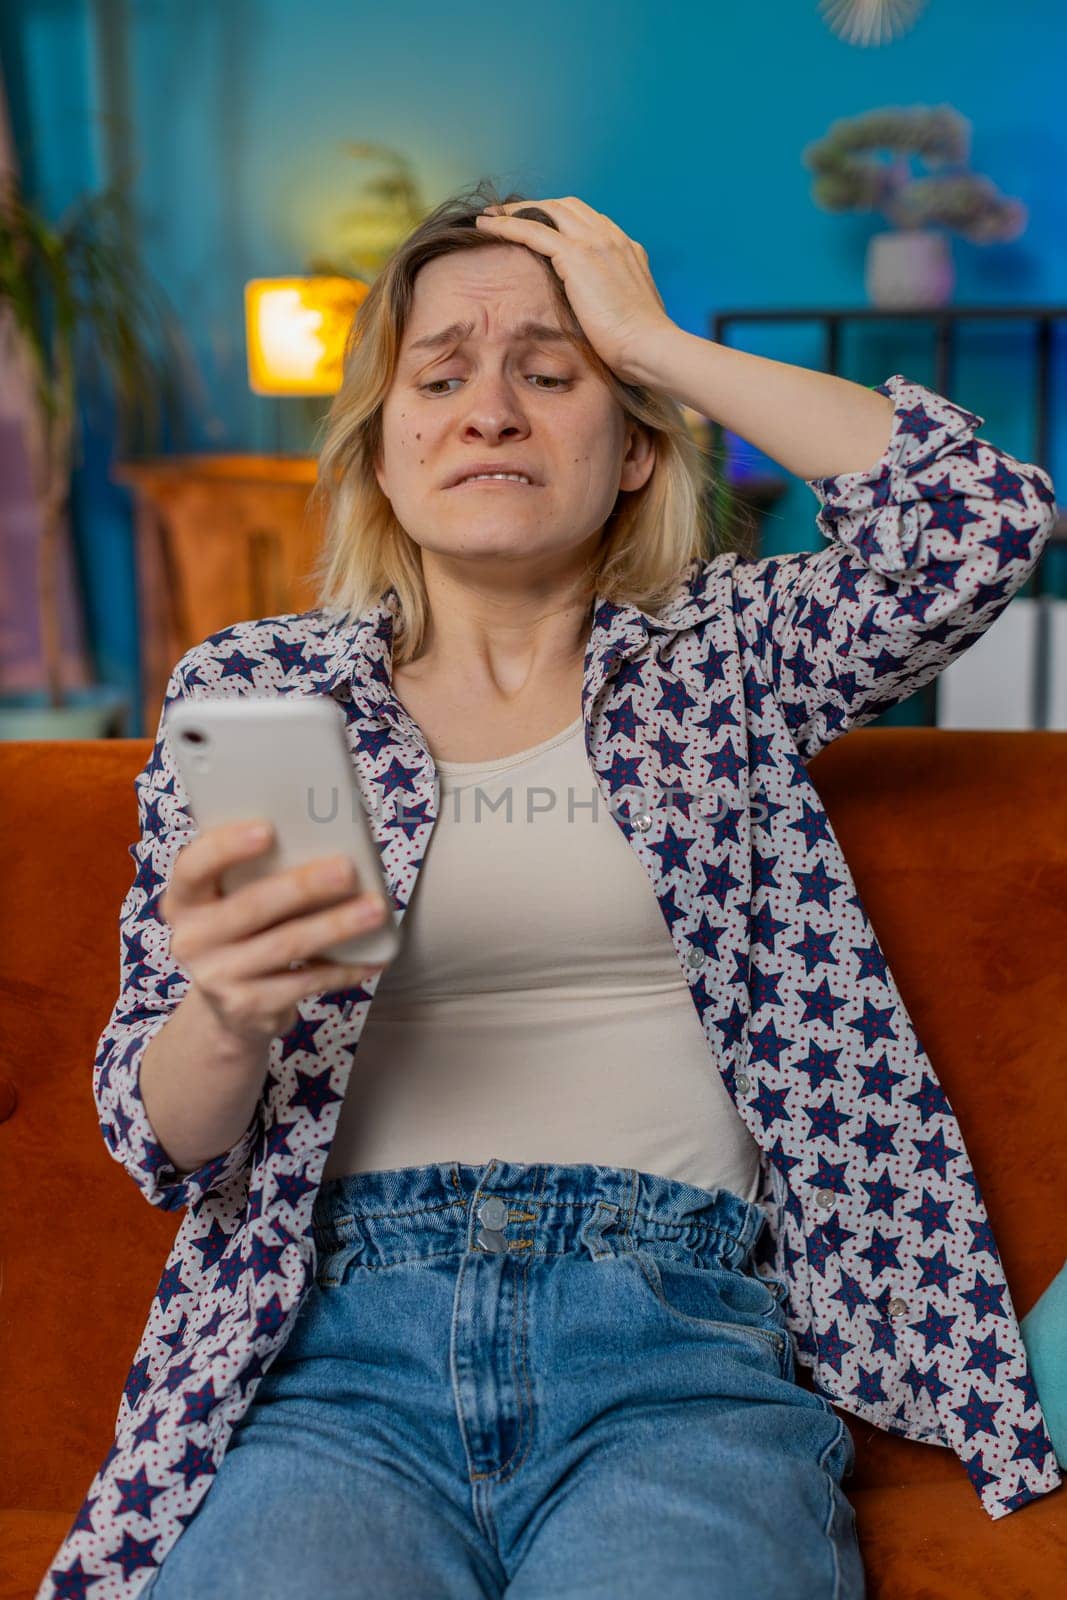 Shocked sad young woman using smartphone reading negative message feels annoyed sitting on sofa by efuror